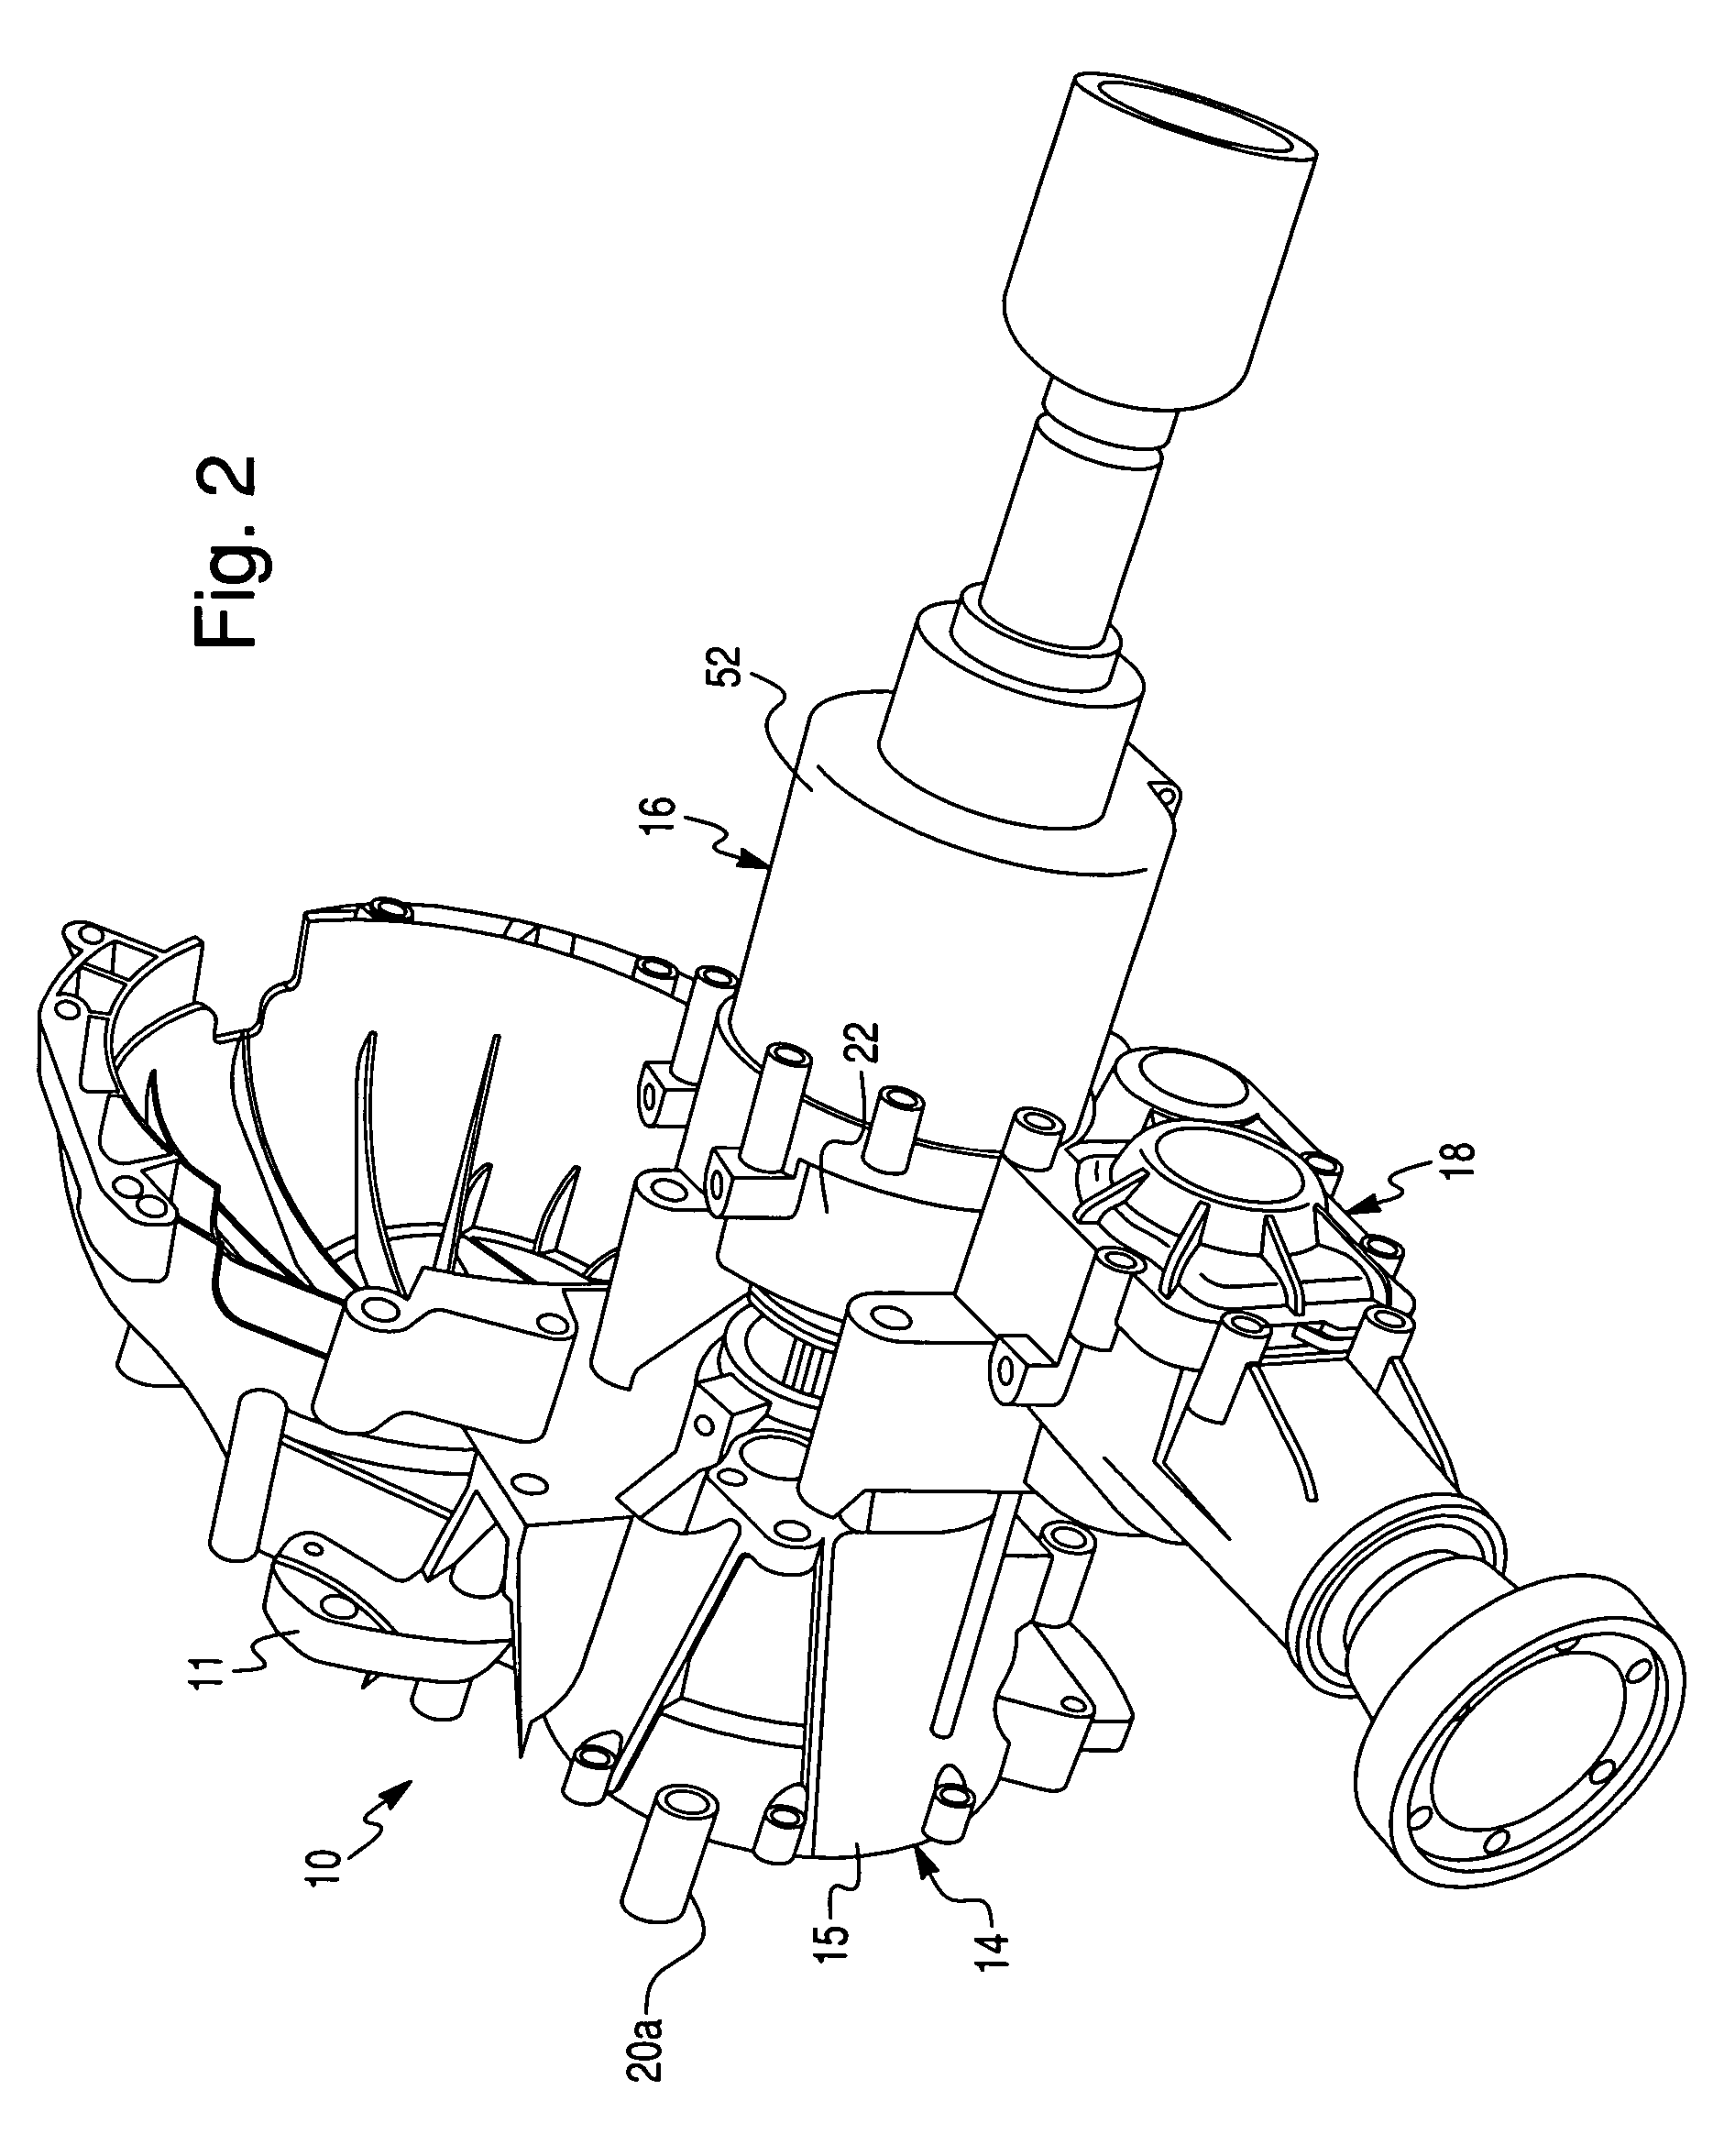 Transaxle unit with integrated power take-off unit and torque coupling device